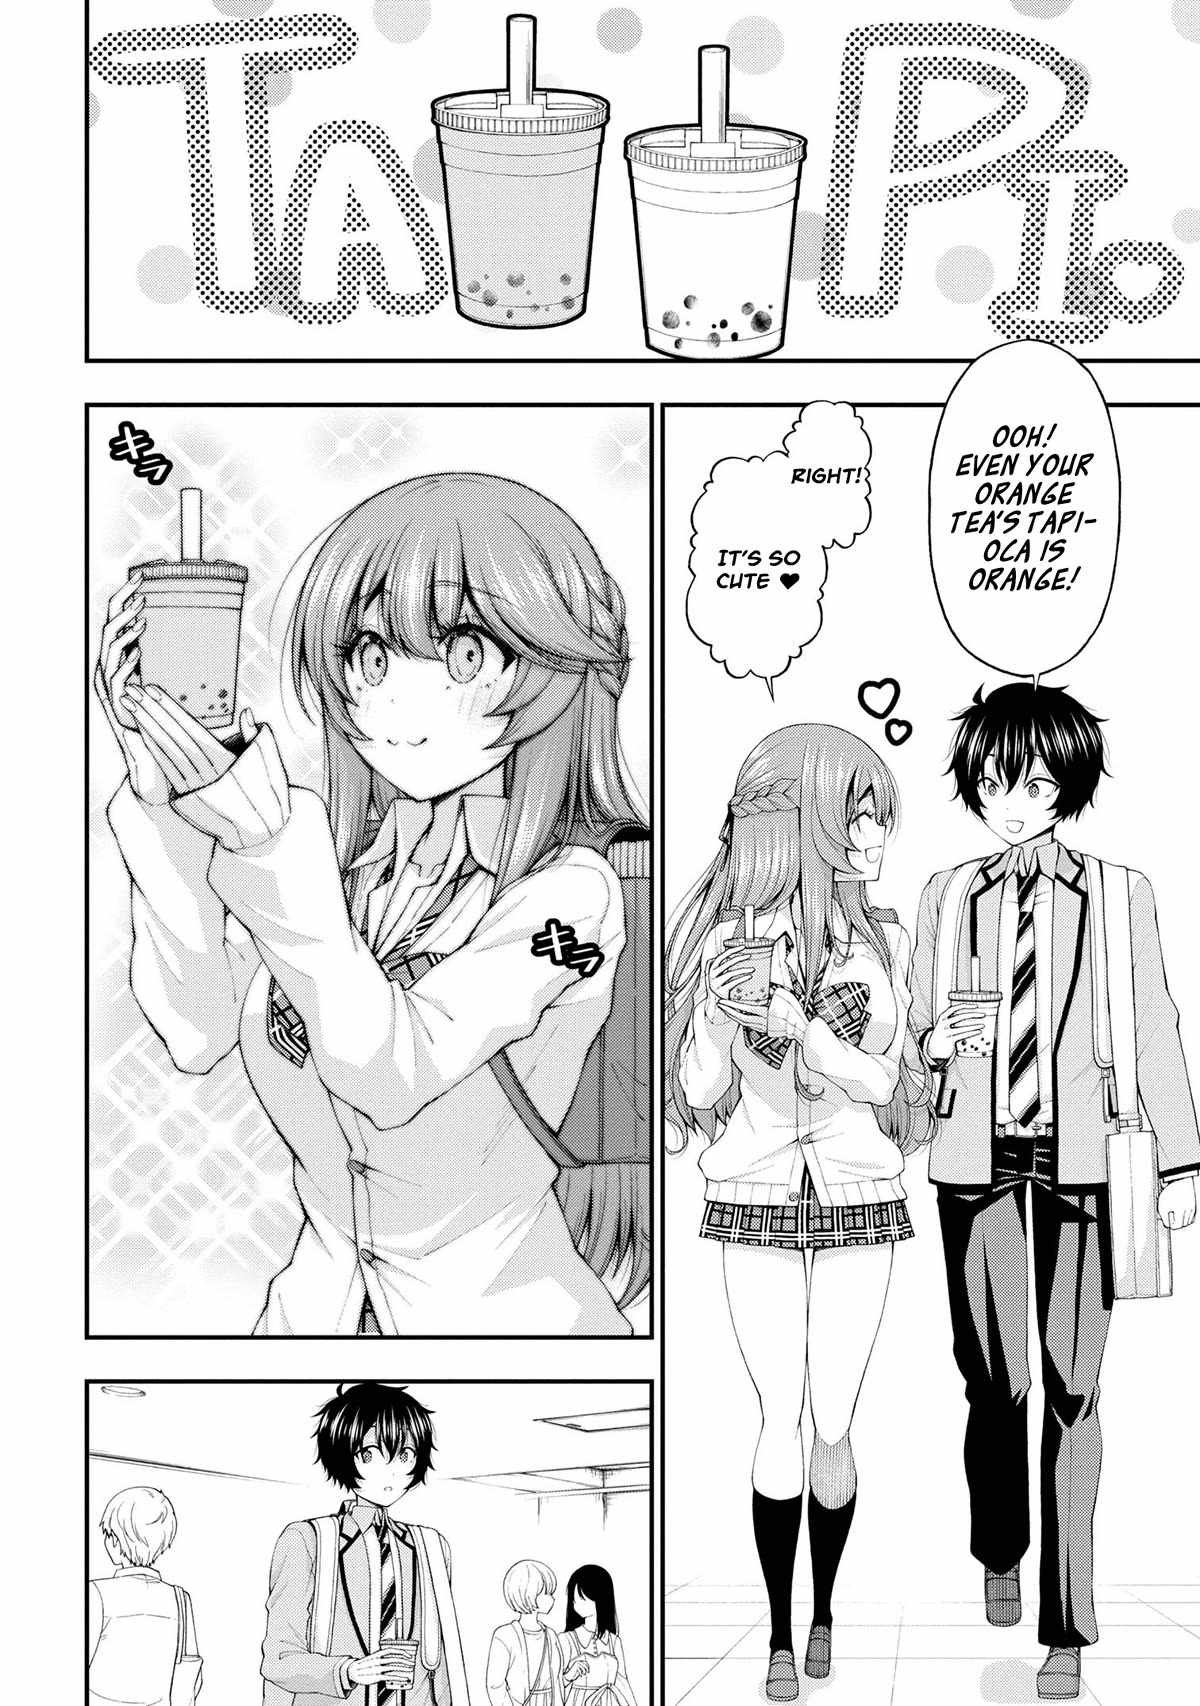 The Gal Who Was Meant to Confess to Me as a Game Punishment Has Apparently Fallen in Love with Me Chapter 14-eng-li - Page 3